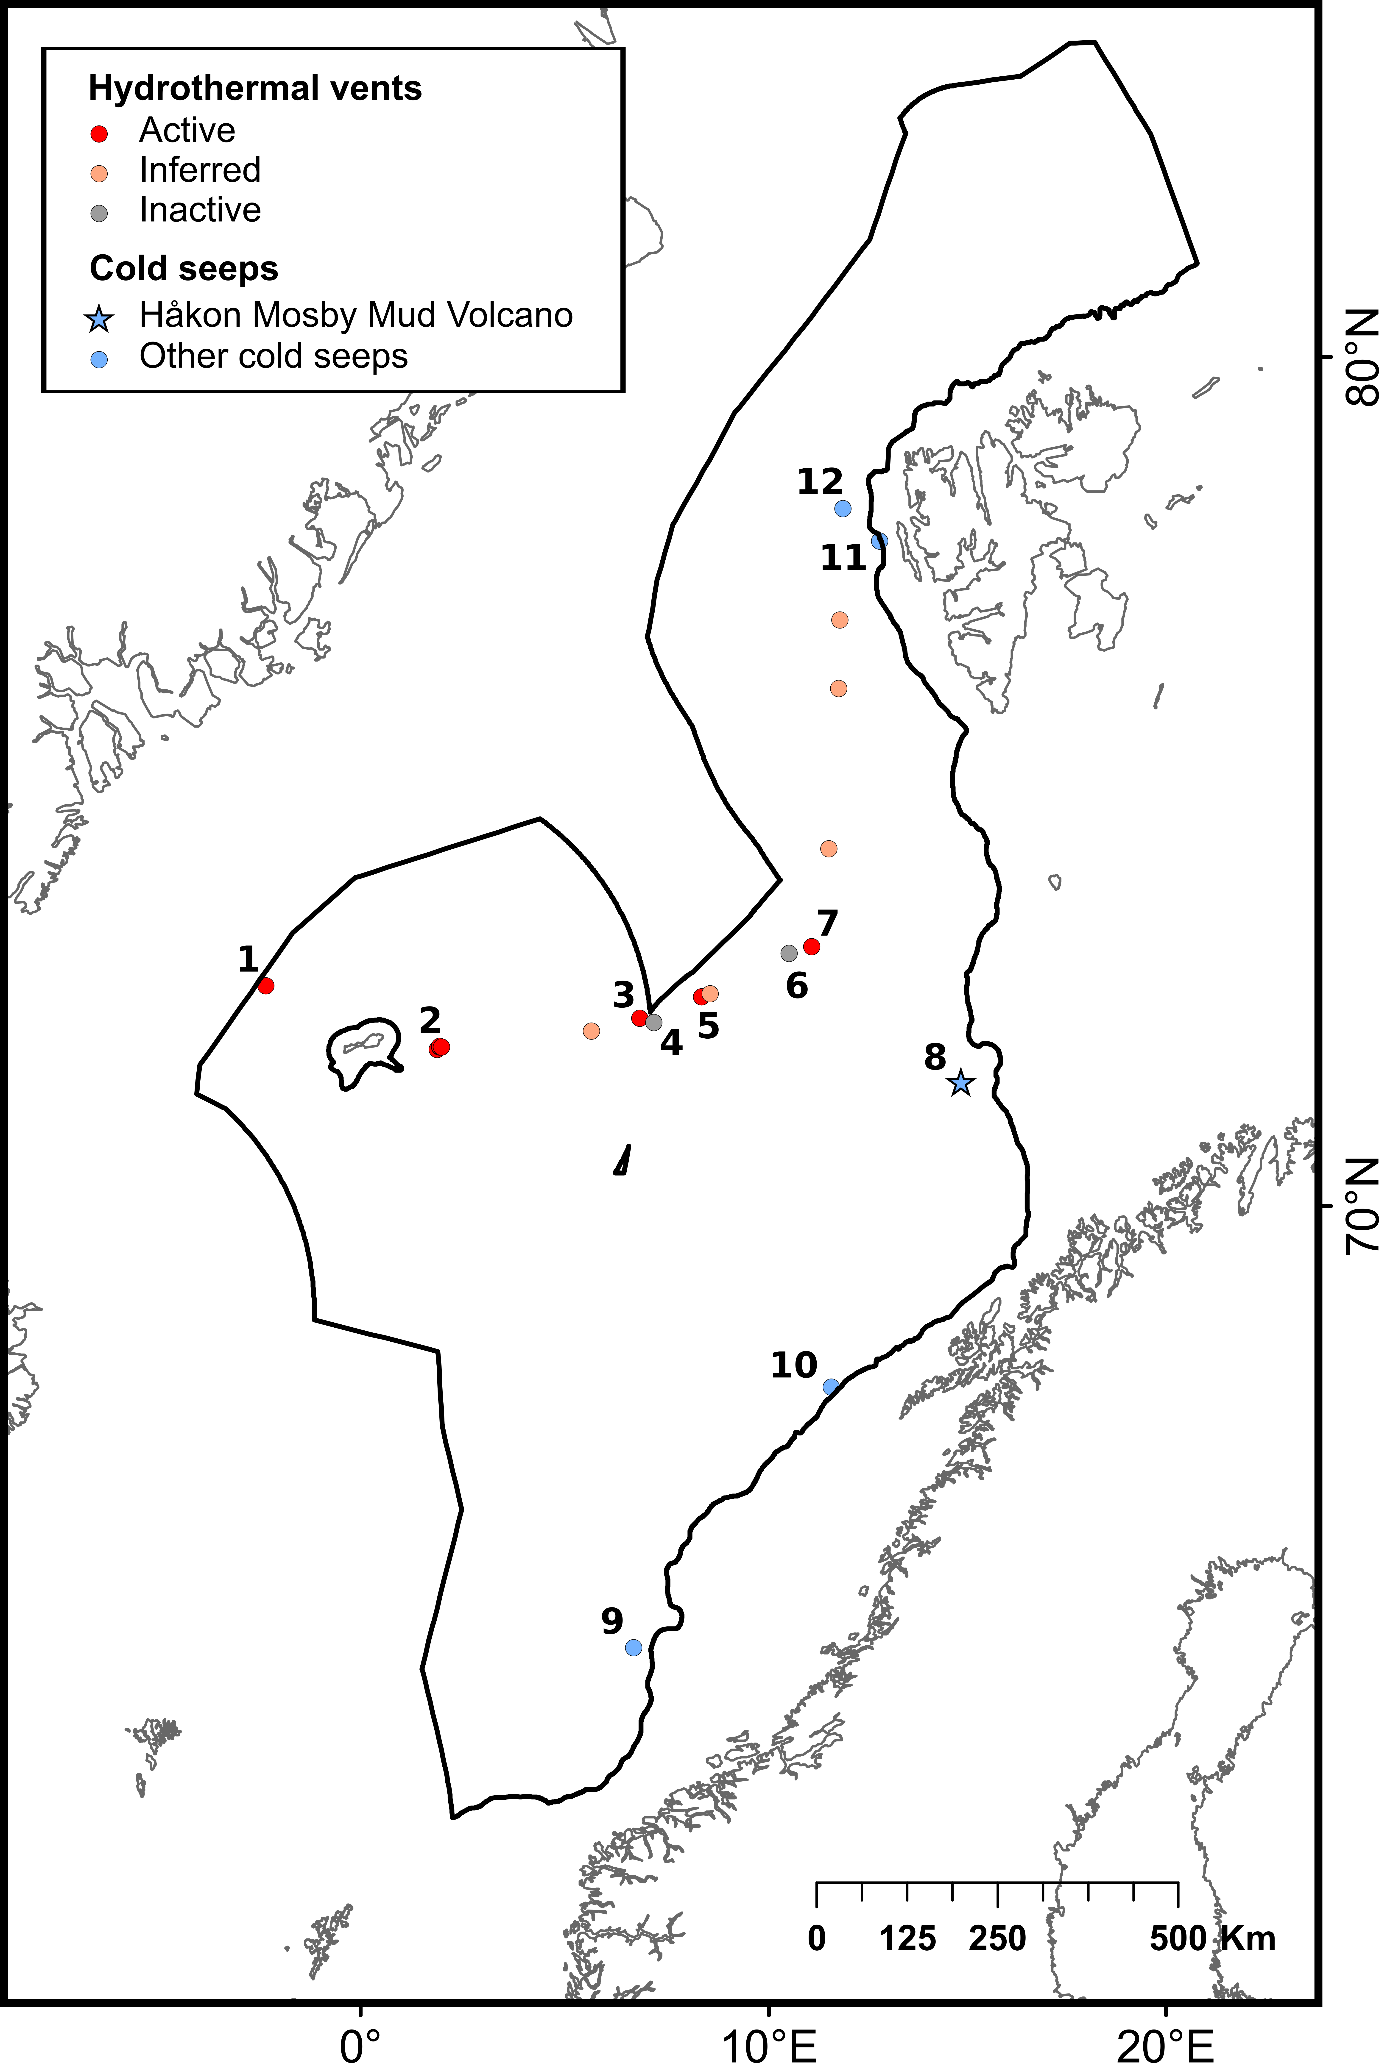 Hydrotermal vents: Active (red dots), Inferred (light orrange dots) and Inactive (grey dots). Cod seeps: Håkon Mosby Mud Volcano (blue star) and other cold seeps (blue dots)